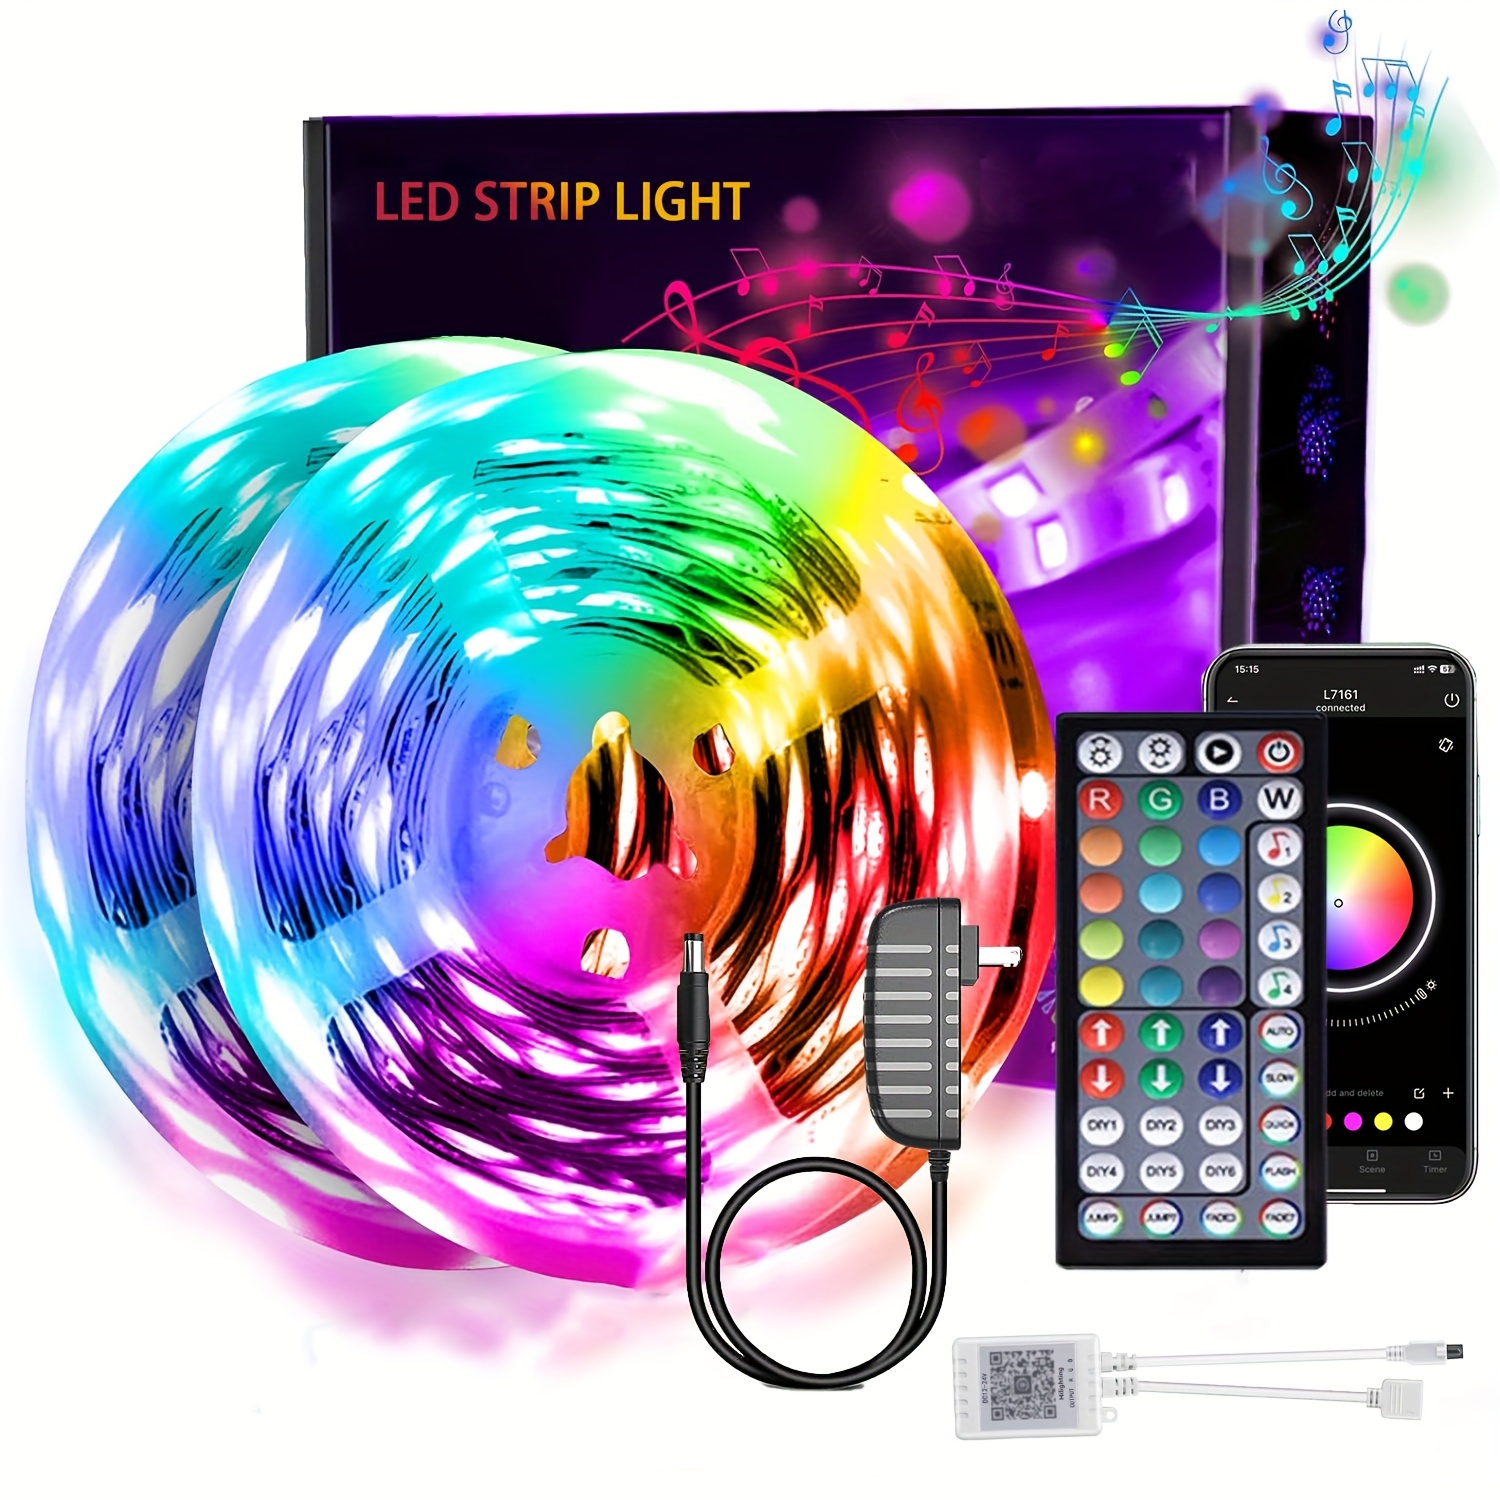  Govee 100ft RGBIC LED Strip Lights, Smart LED Lights Work with  Alexa and Google Assistant, WiFi App Control Segmented DIY Multiple Colors,  Color Changing Lights Music Sync, LED Lights for Bedroom 